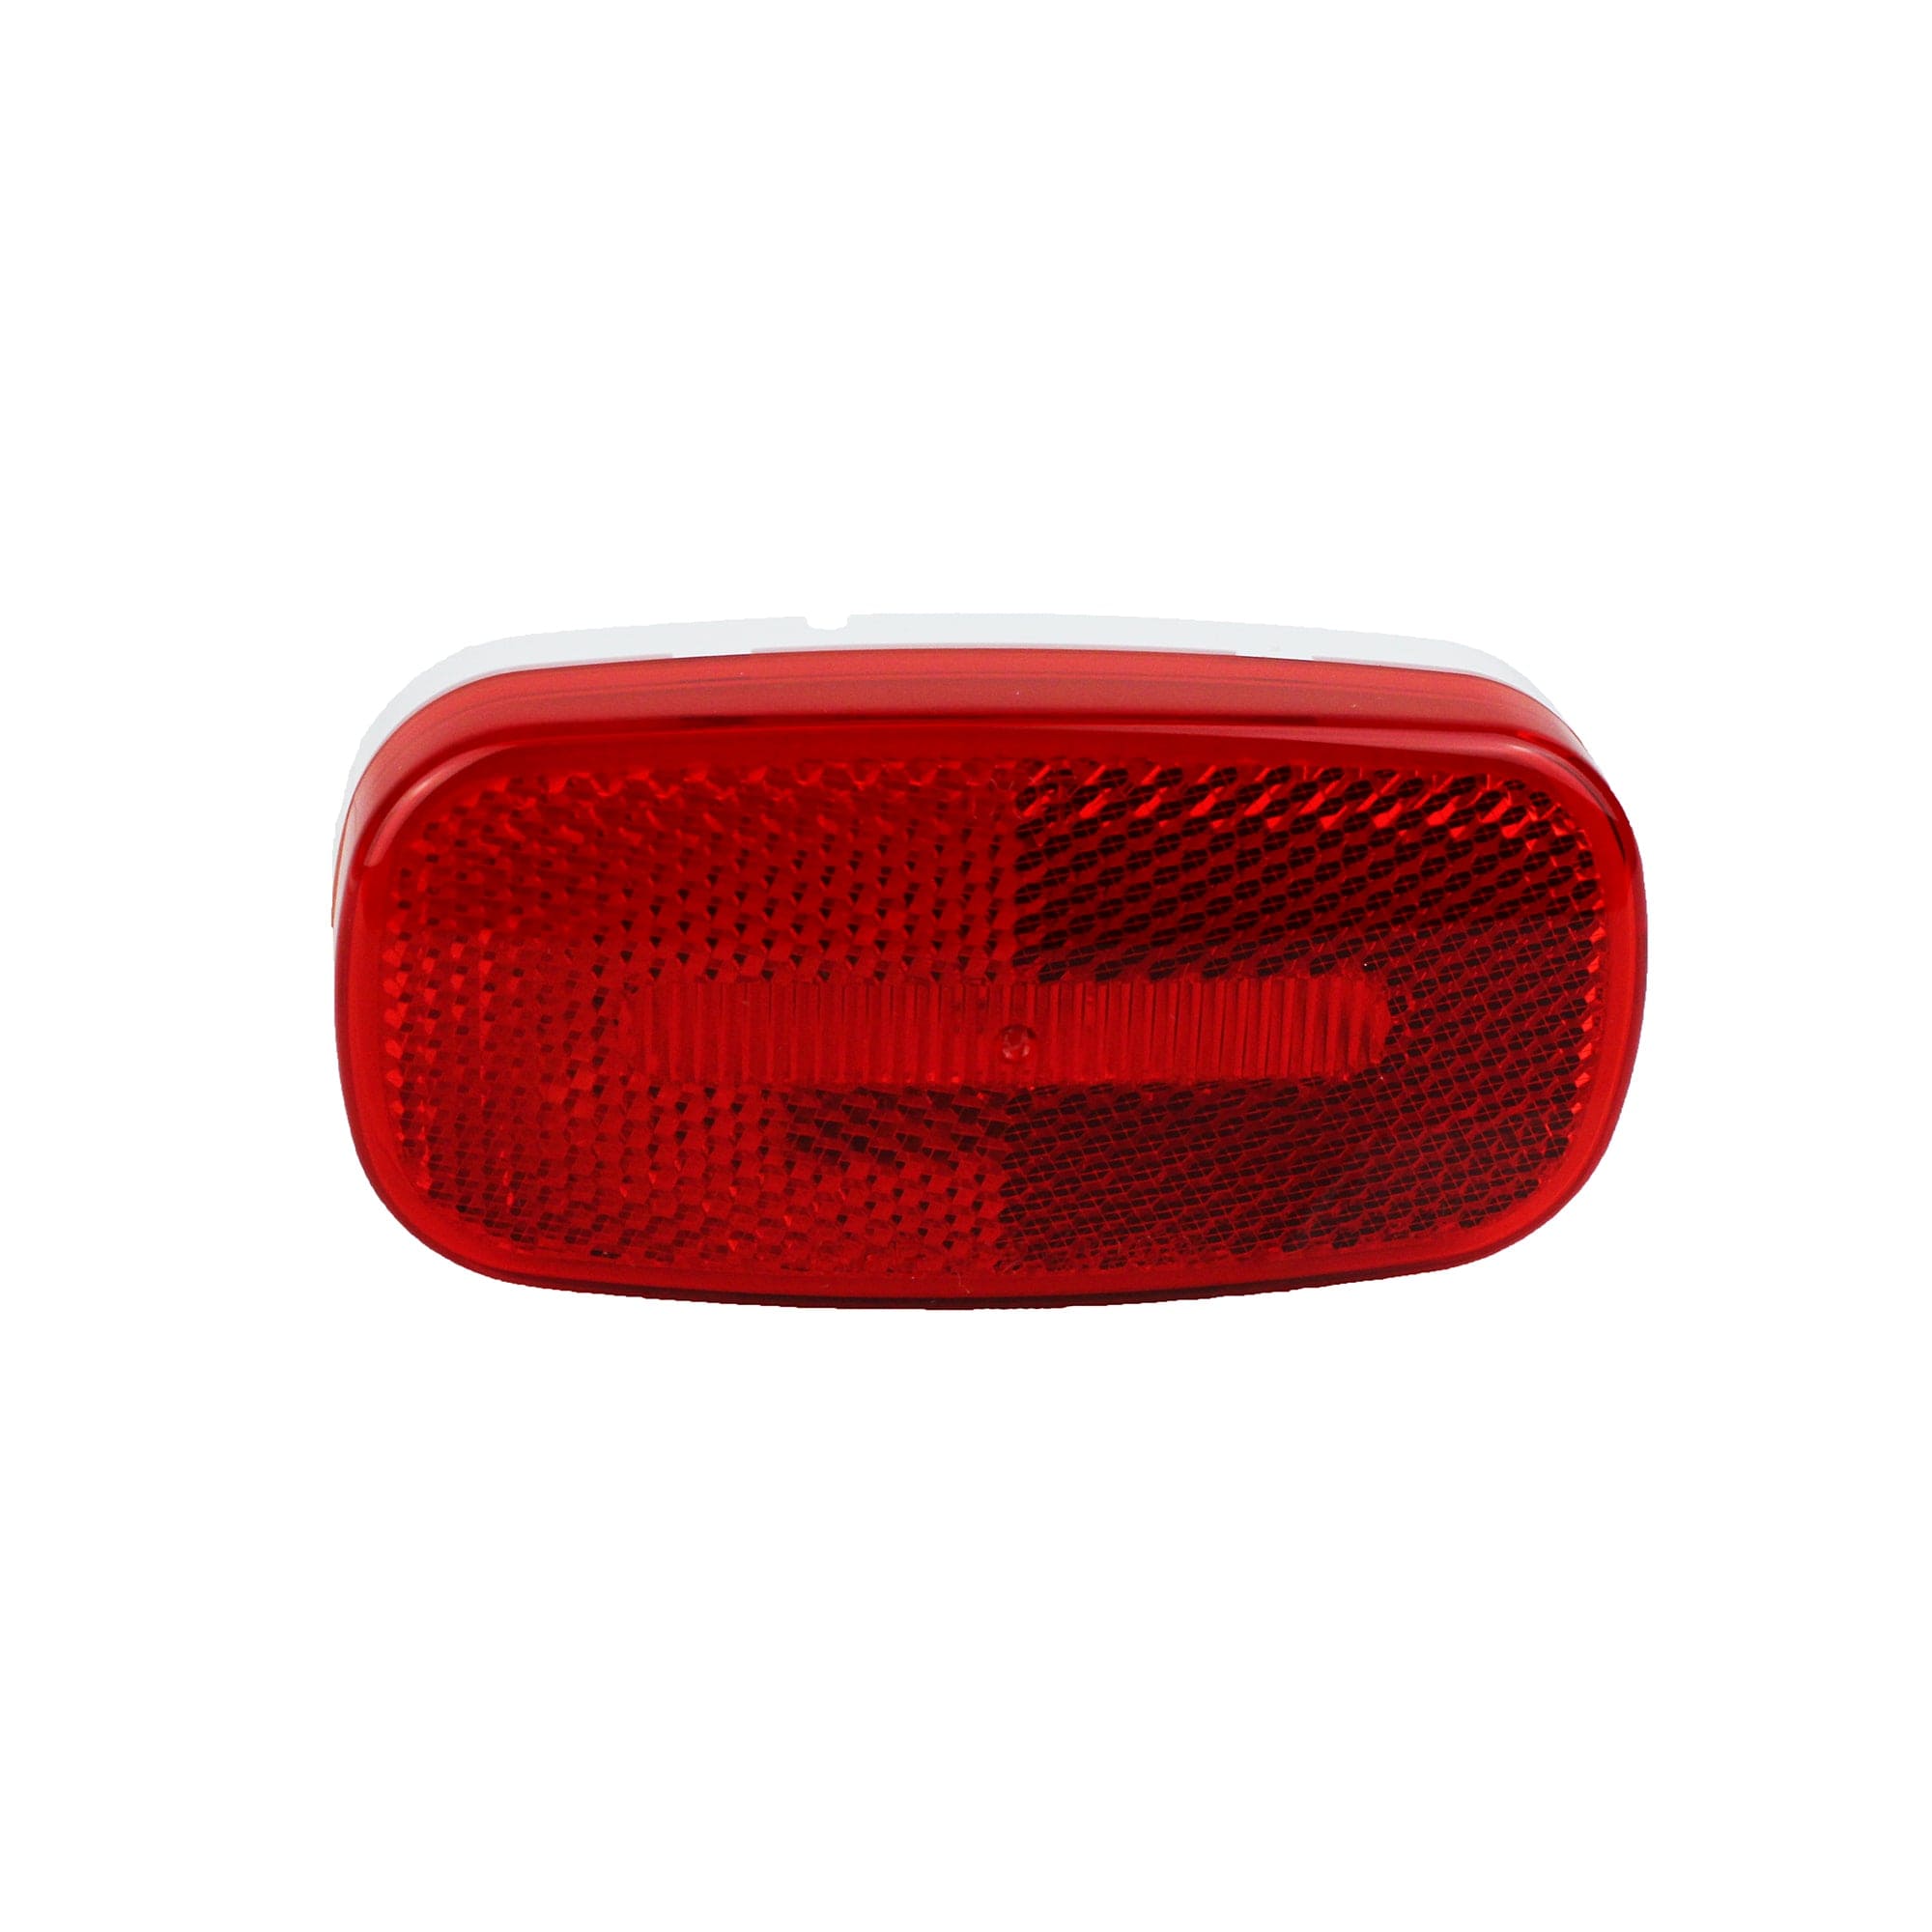 Anderson Marine V180R Oblong Clearance Light - Red